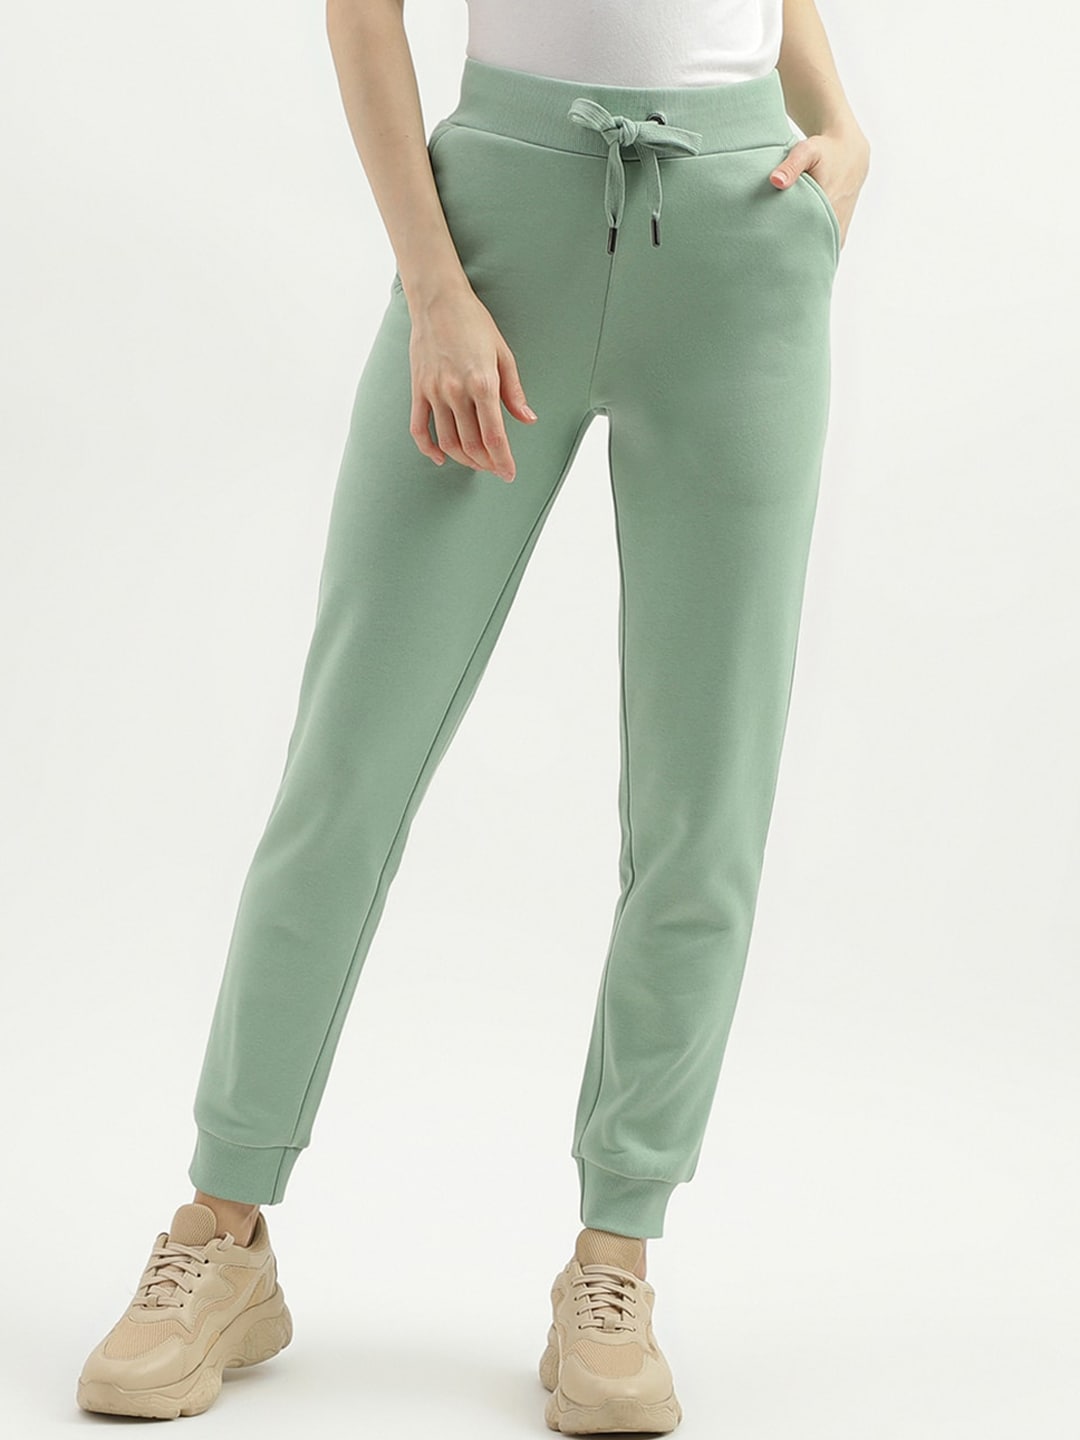 United Colors of Benetton Women Flat Front Regular Fit Joggers Trousers Price in India